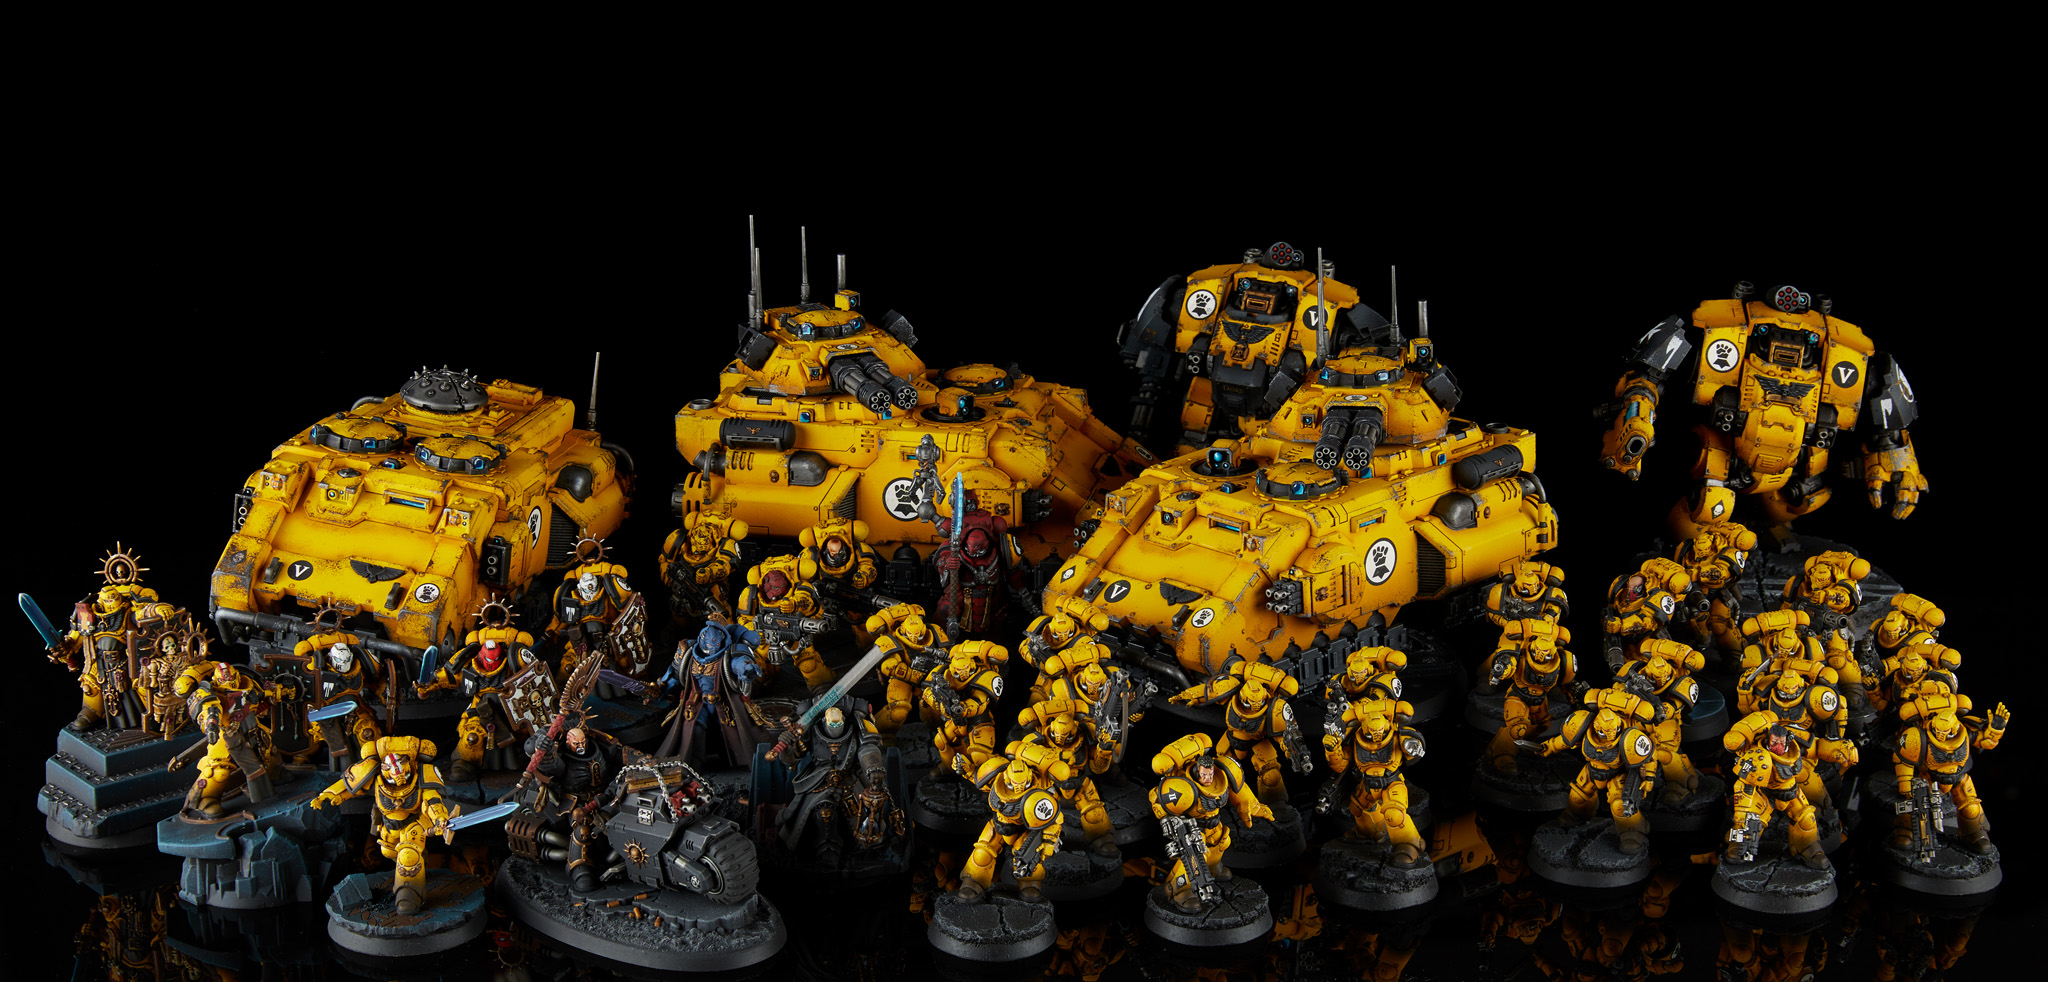 Imperial Fist Gladiator Reapers